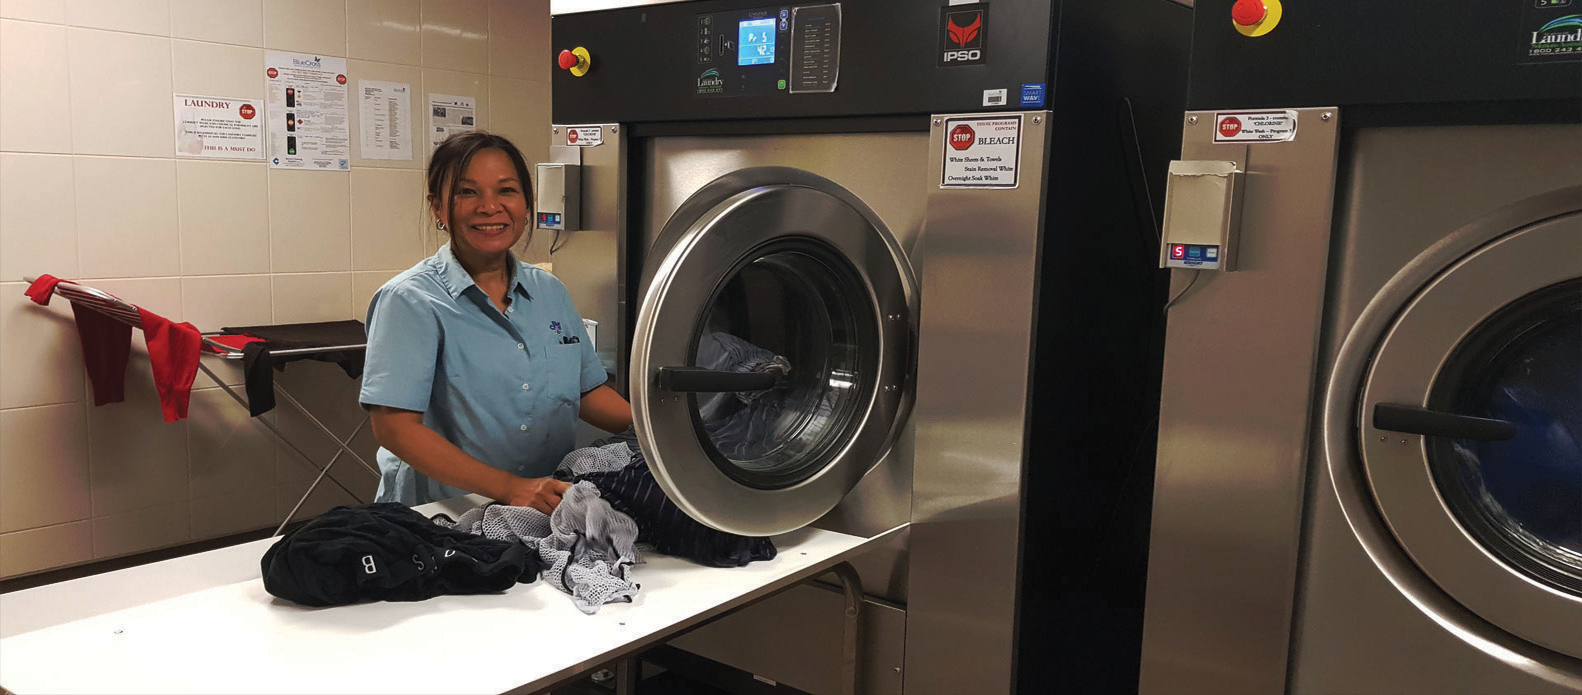 Laundry trolleys providing a cleaner, safer facility for staff and residents